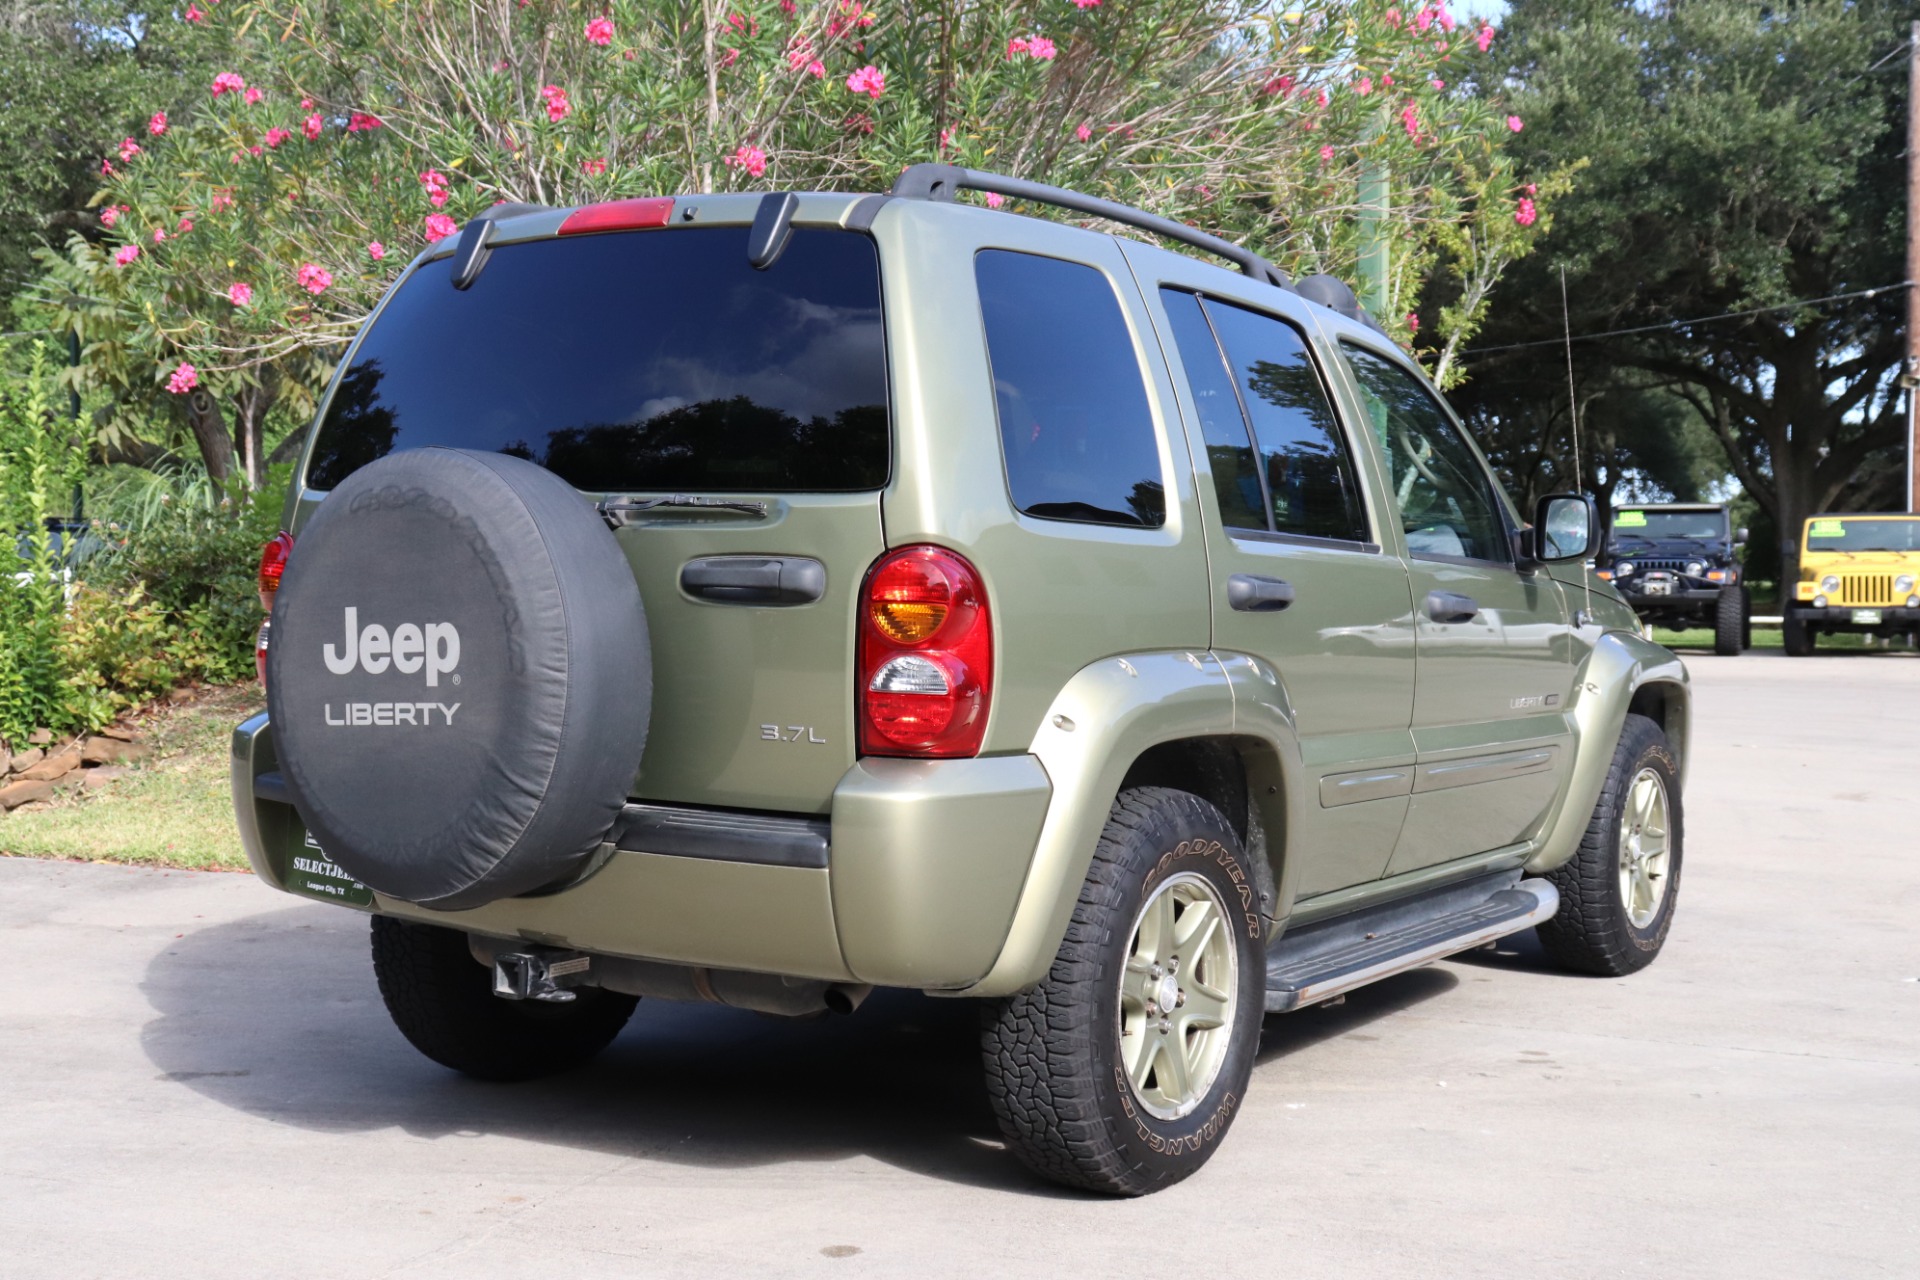 Used-2003-Jeep-Liberty-4dr-Renegade-4WD